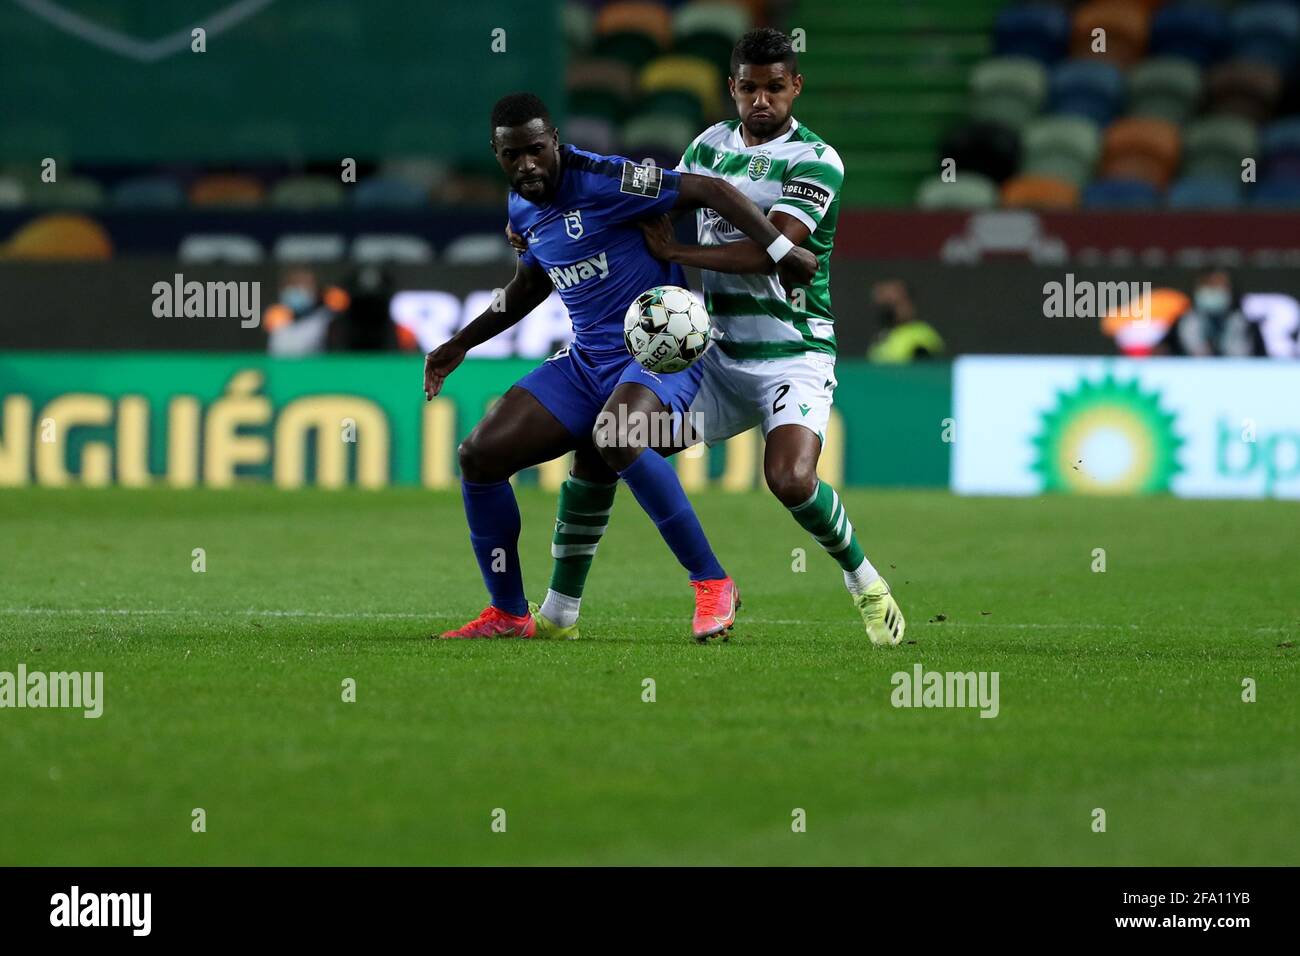 Lisbon, Portugal. 21st Apr, 2021. Matheus Reis of Sporting CP (R ) vies with Silvestre Varela of Belenenses SAD during the Portuguese League football match between Sporting CP and Belenenses SAD at Jose Alvalade stadium in Lisbon, Portugal on April 21, 2021. Credit: Pedro Fiuza/ZUMA Wire/Alamy Live News Stock Photo